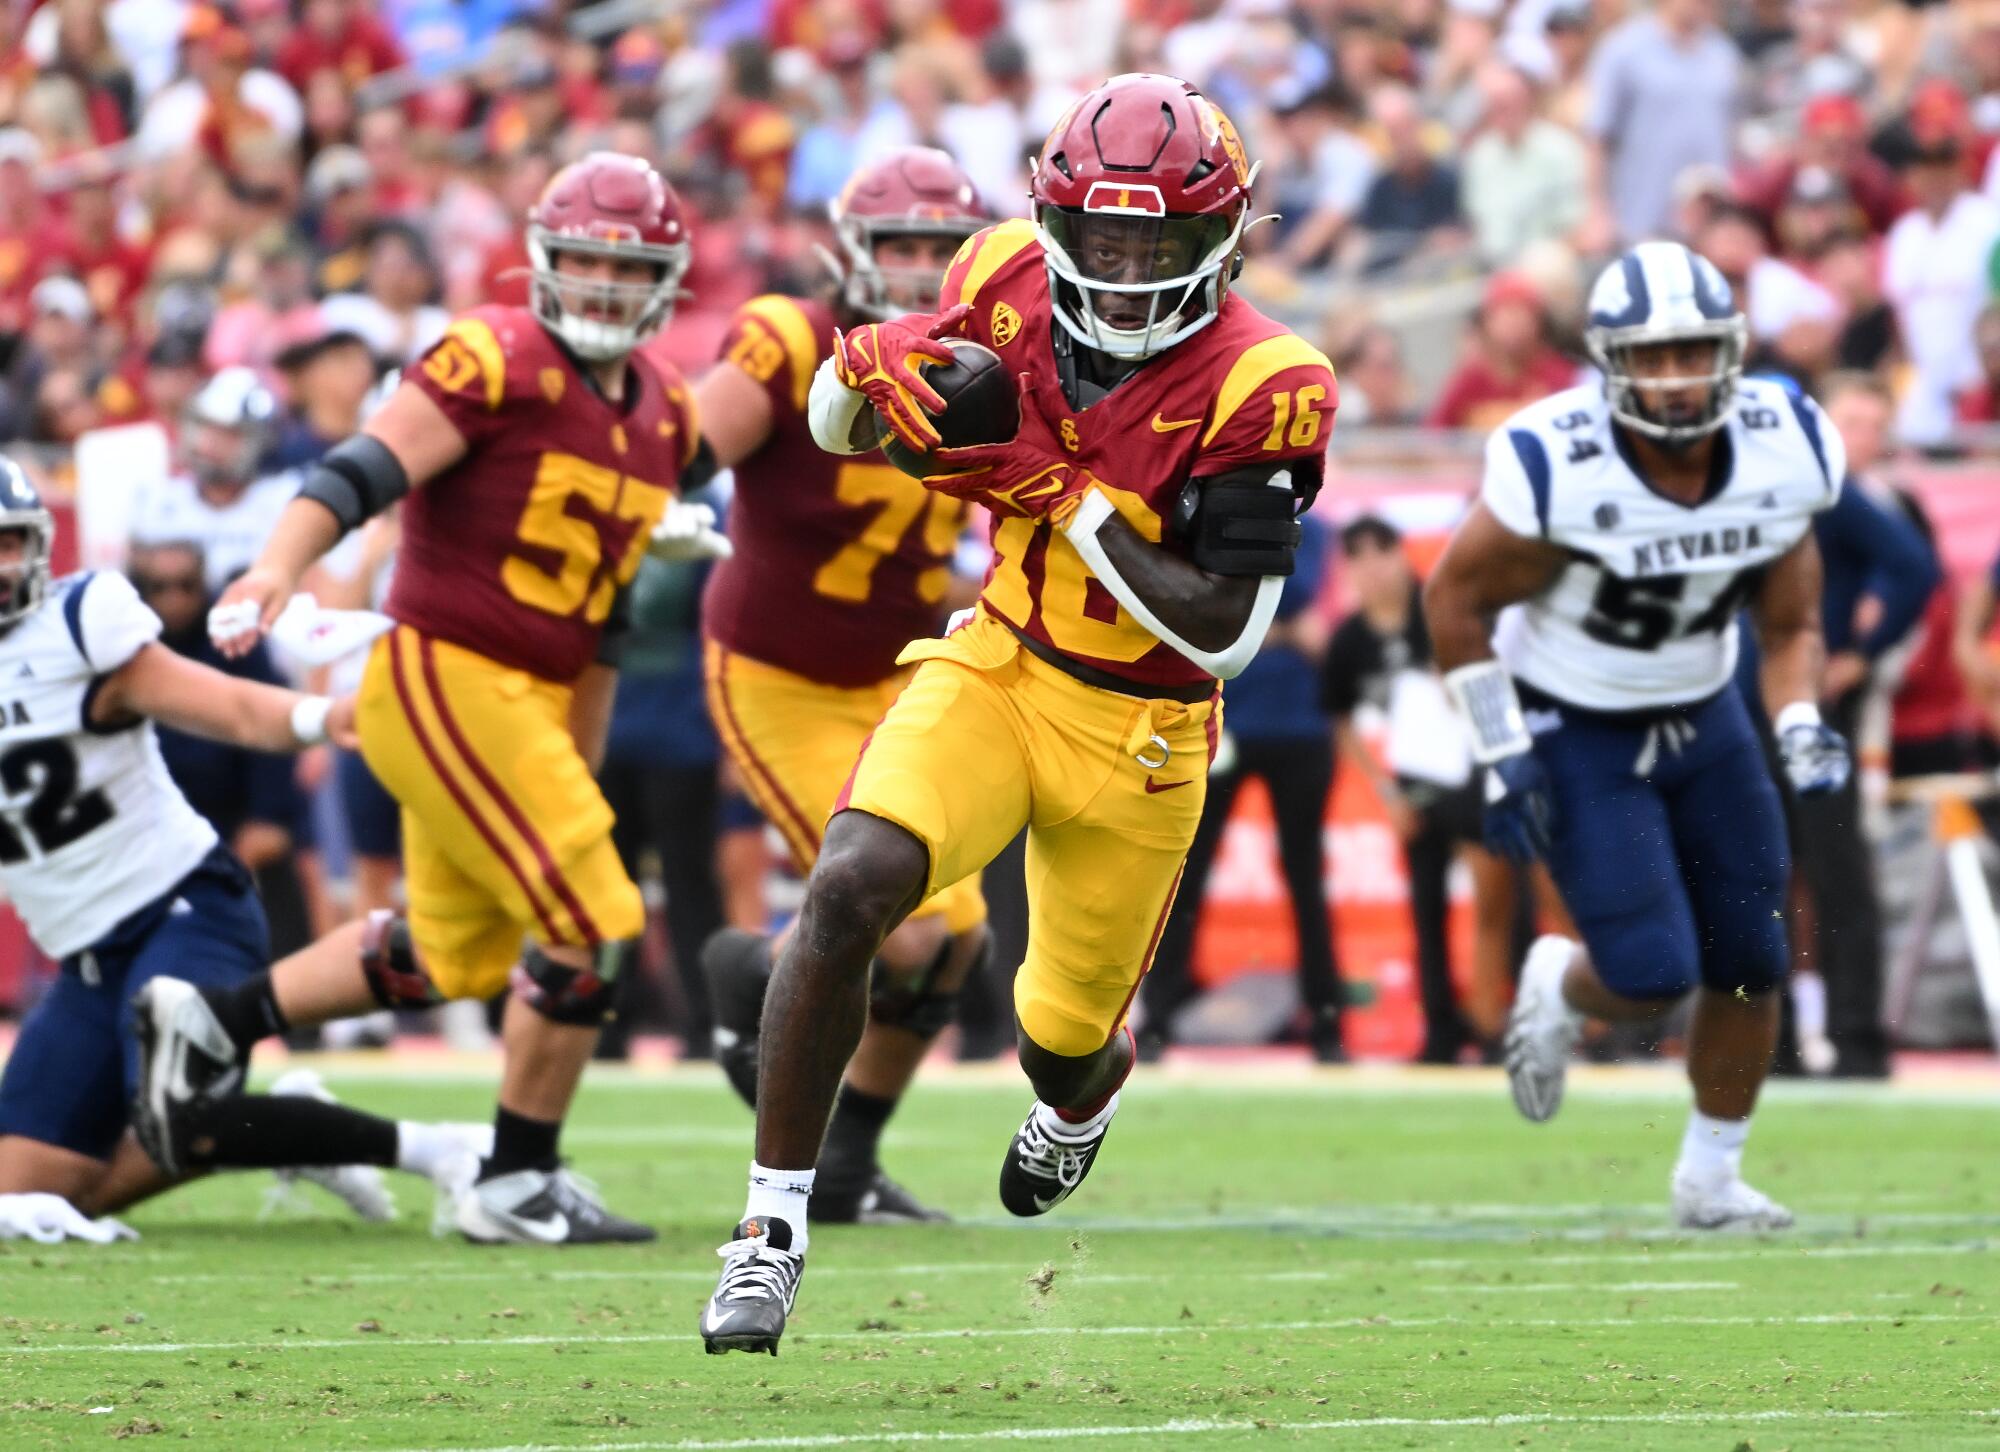 USC receiver Tahj Washington makes a catch for a touchdown against Nevada in the second quarter.